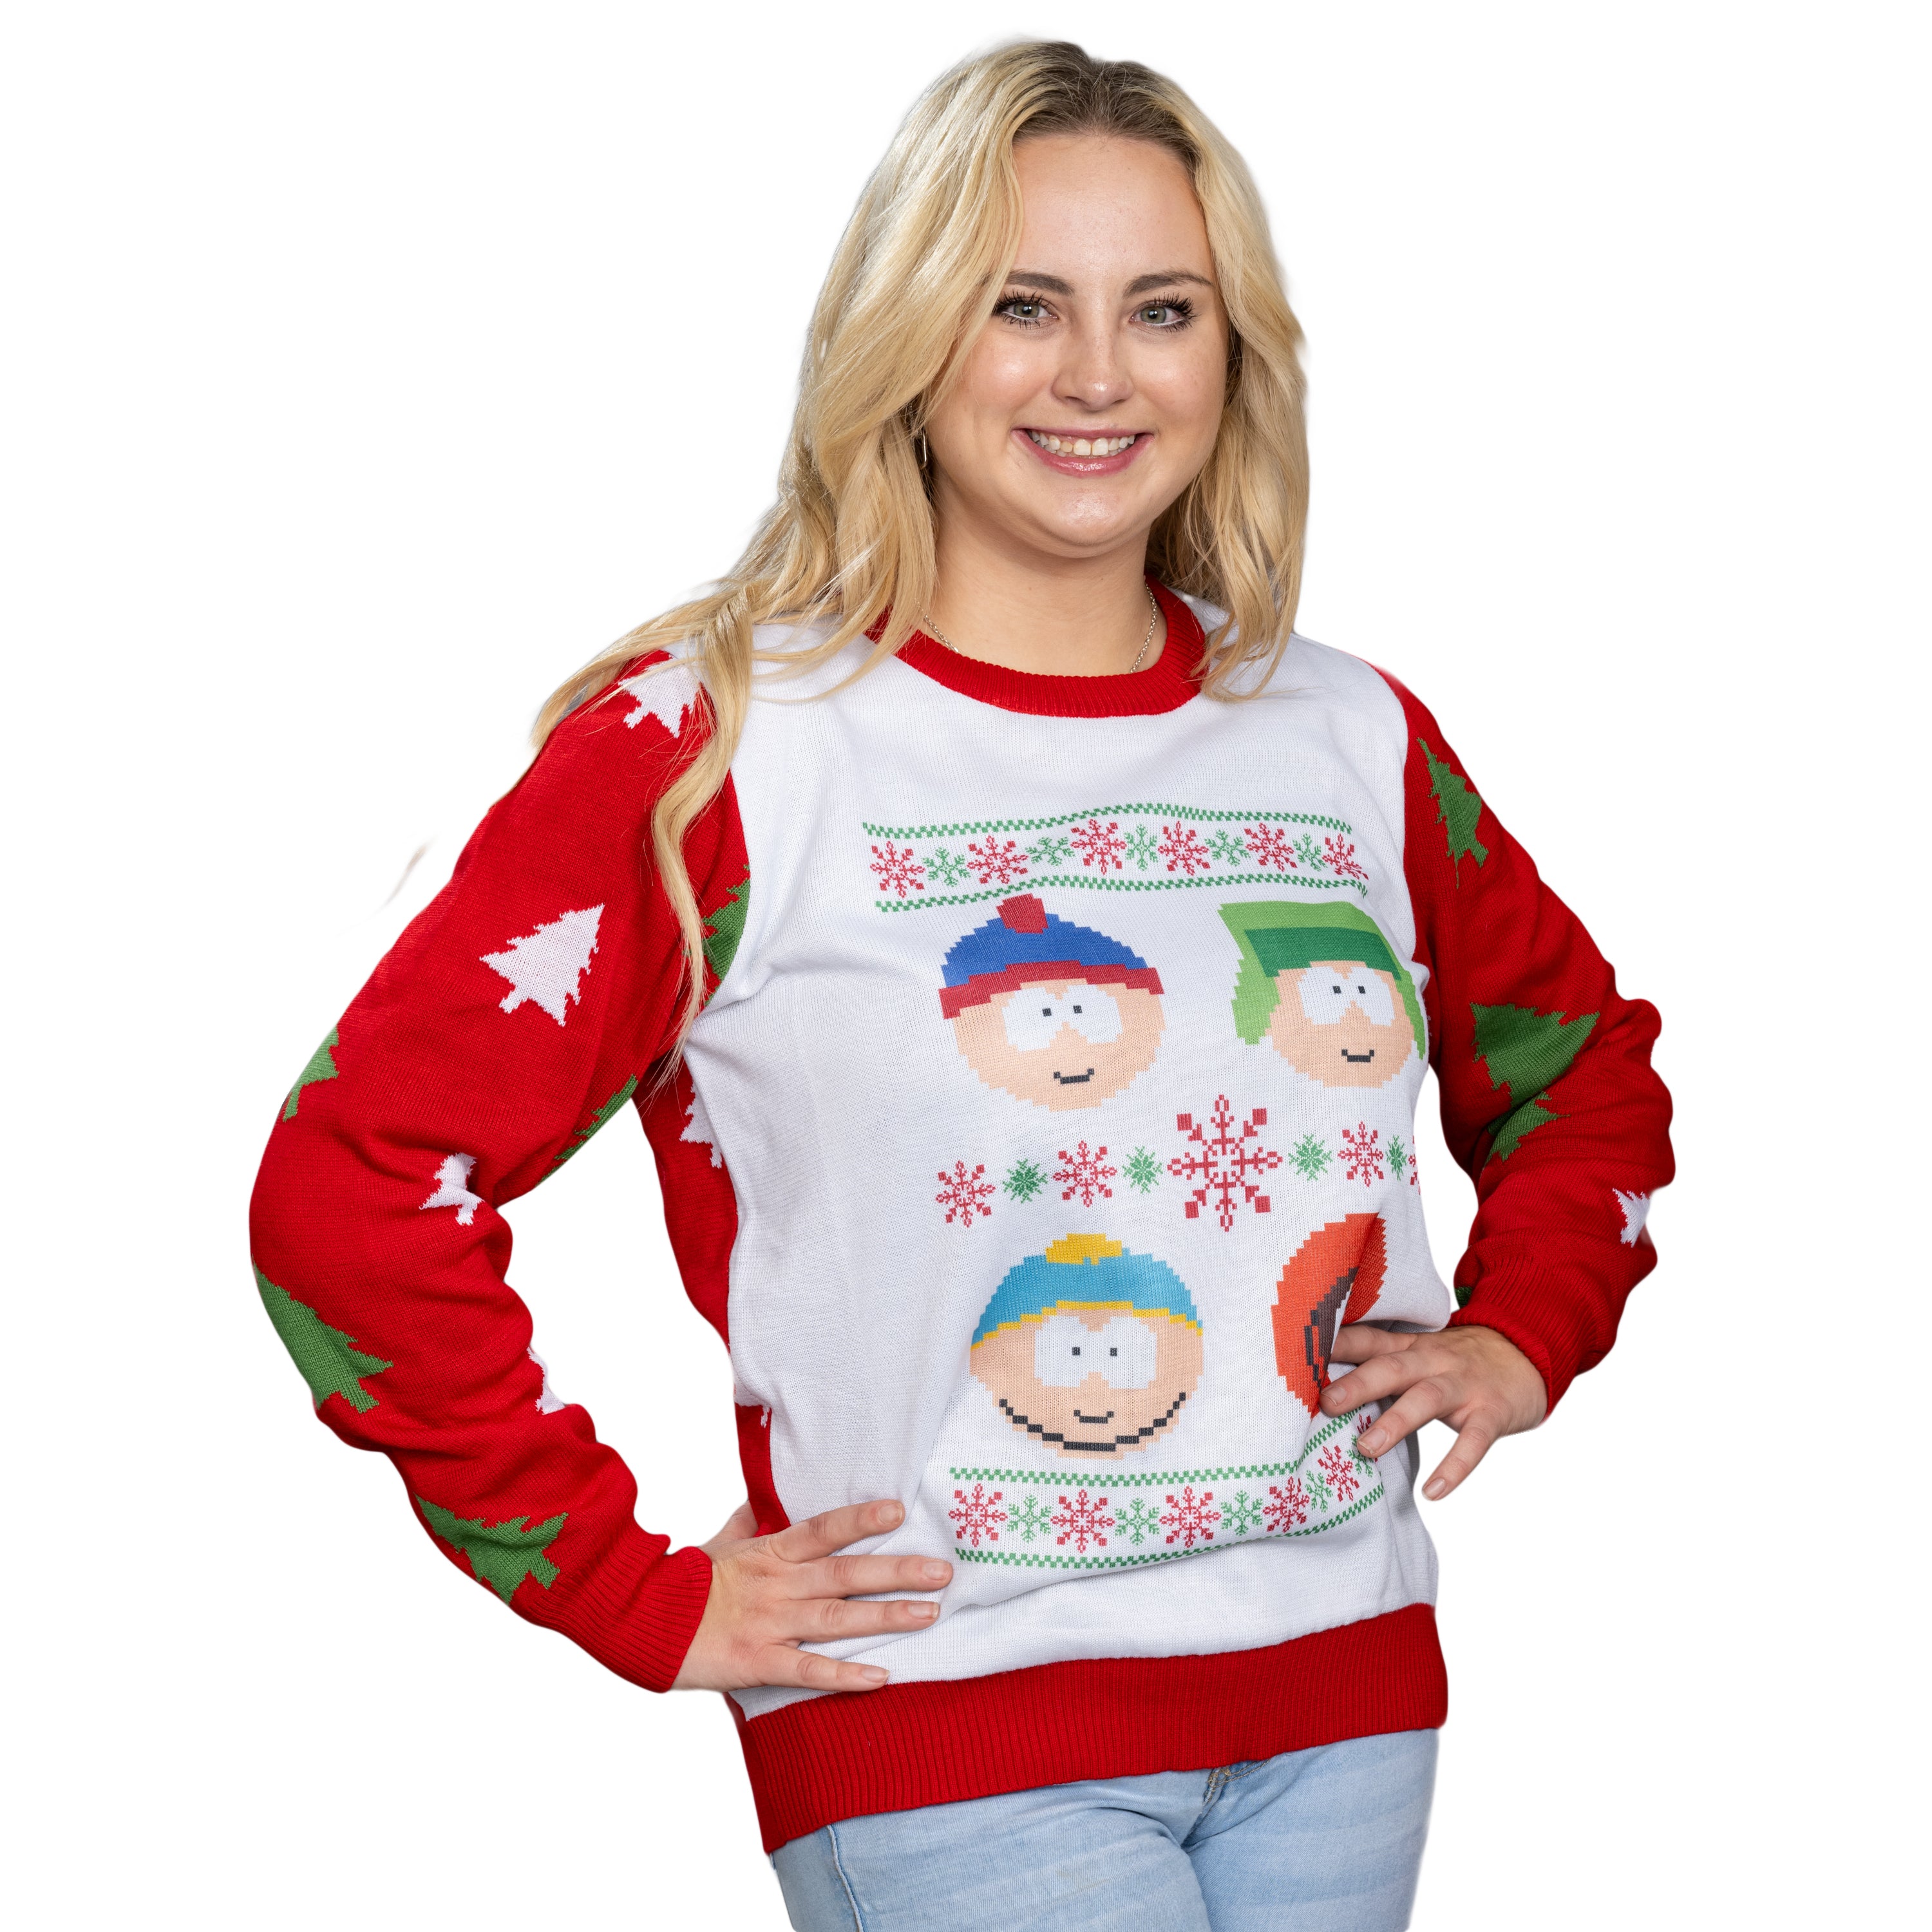 South Park Stan Kyle Cartman Kenny Faces Ugly Christmas Sweater